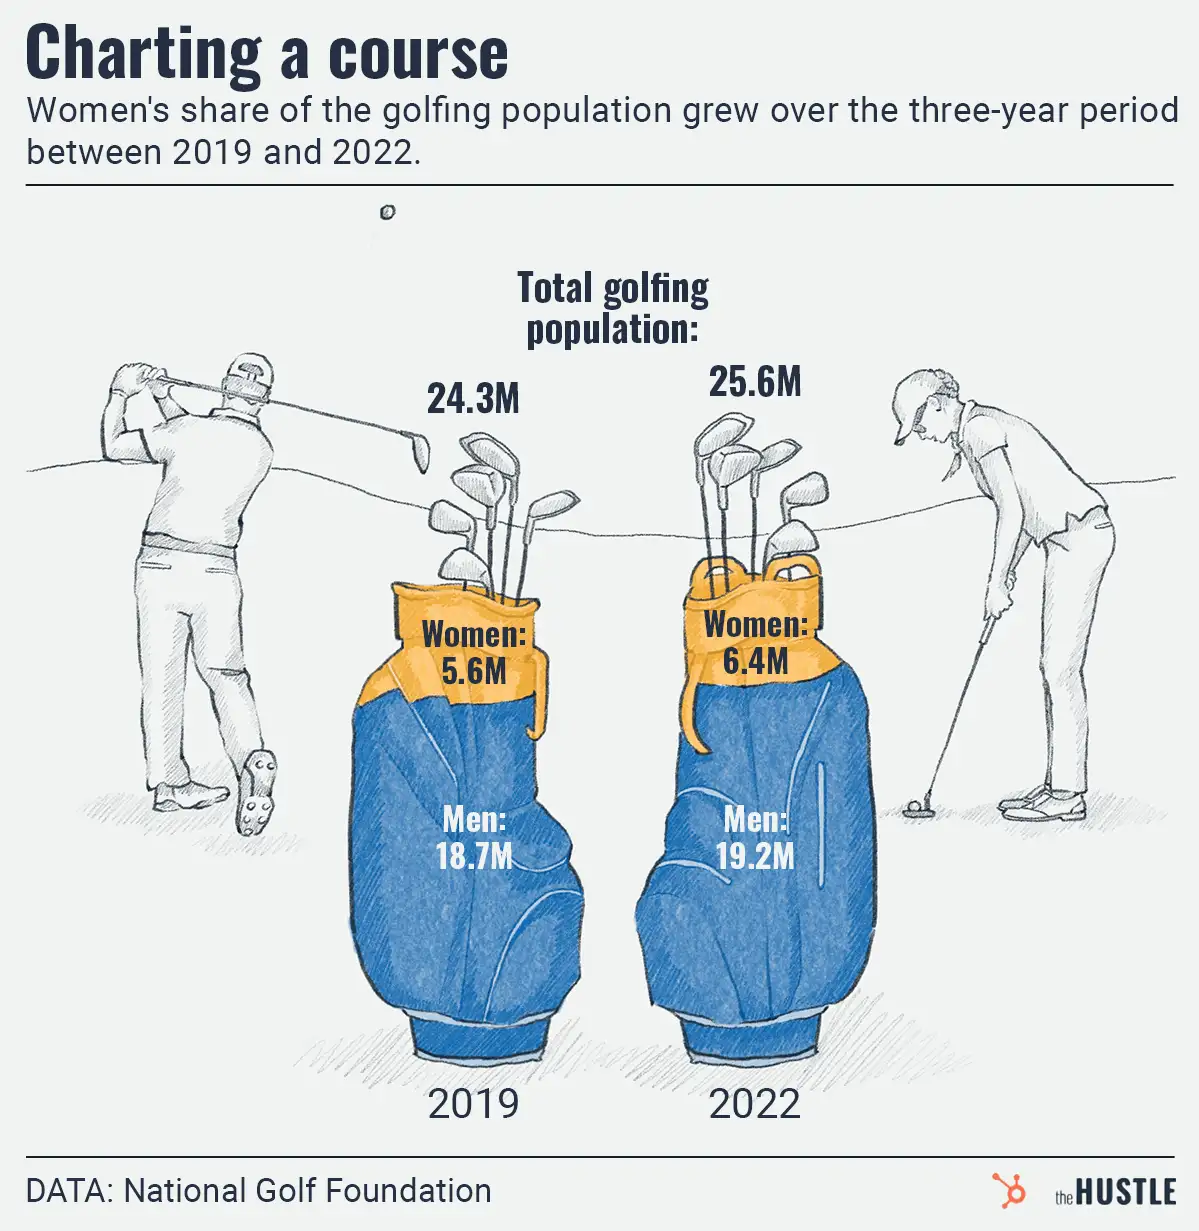 The golf industry takes a big swing on women players